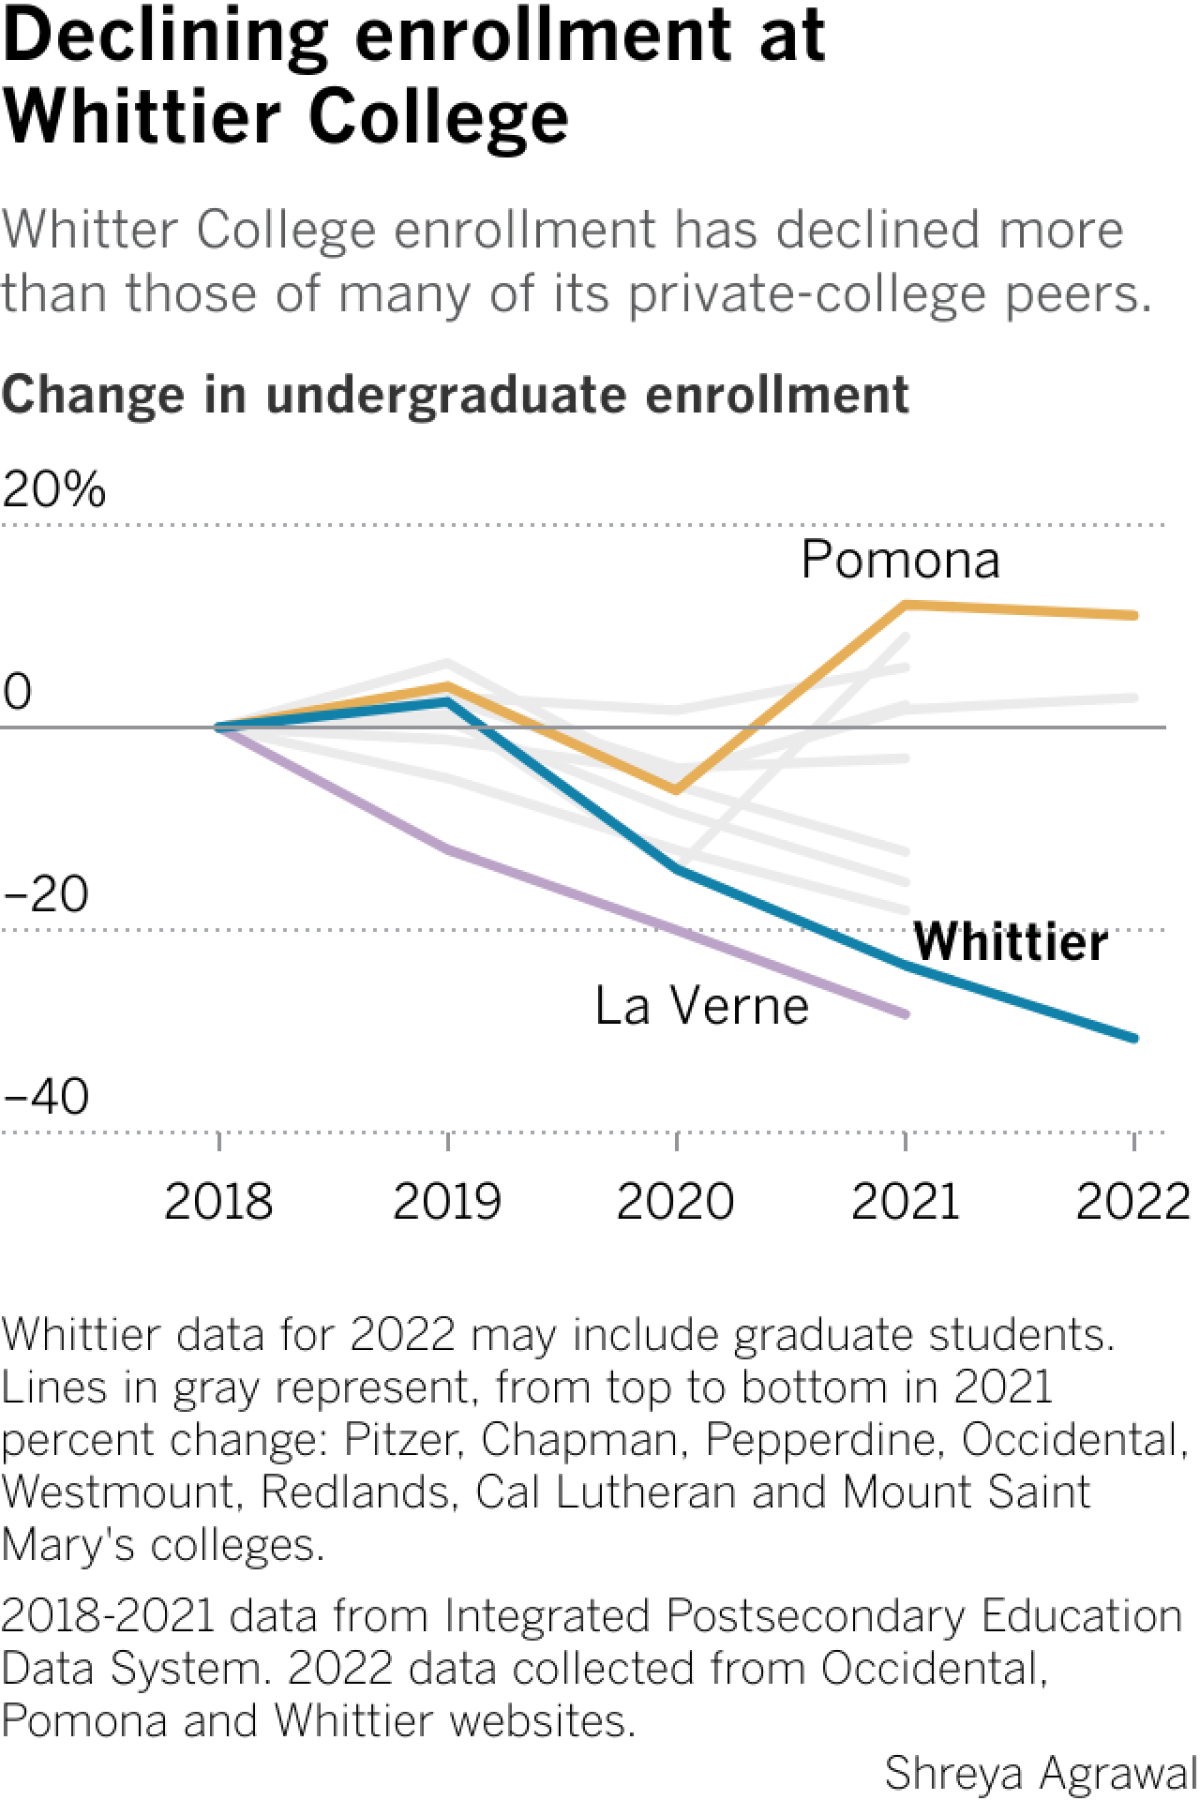 Bar chart shows the percentage gain or loss in undergraduate enrollment since 2018 at Whittier College and 10 of its competitors.